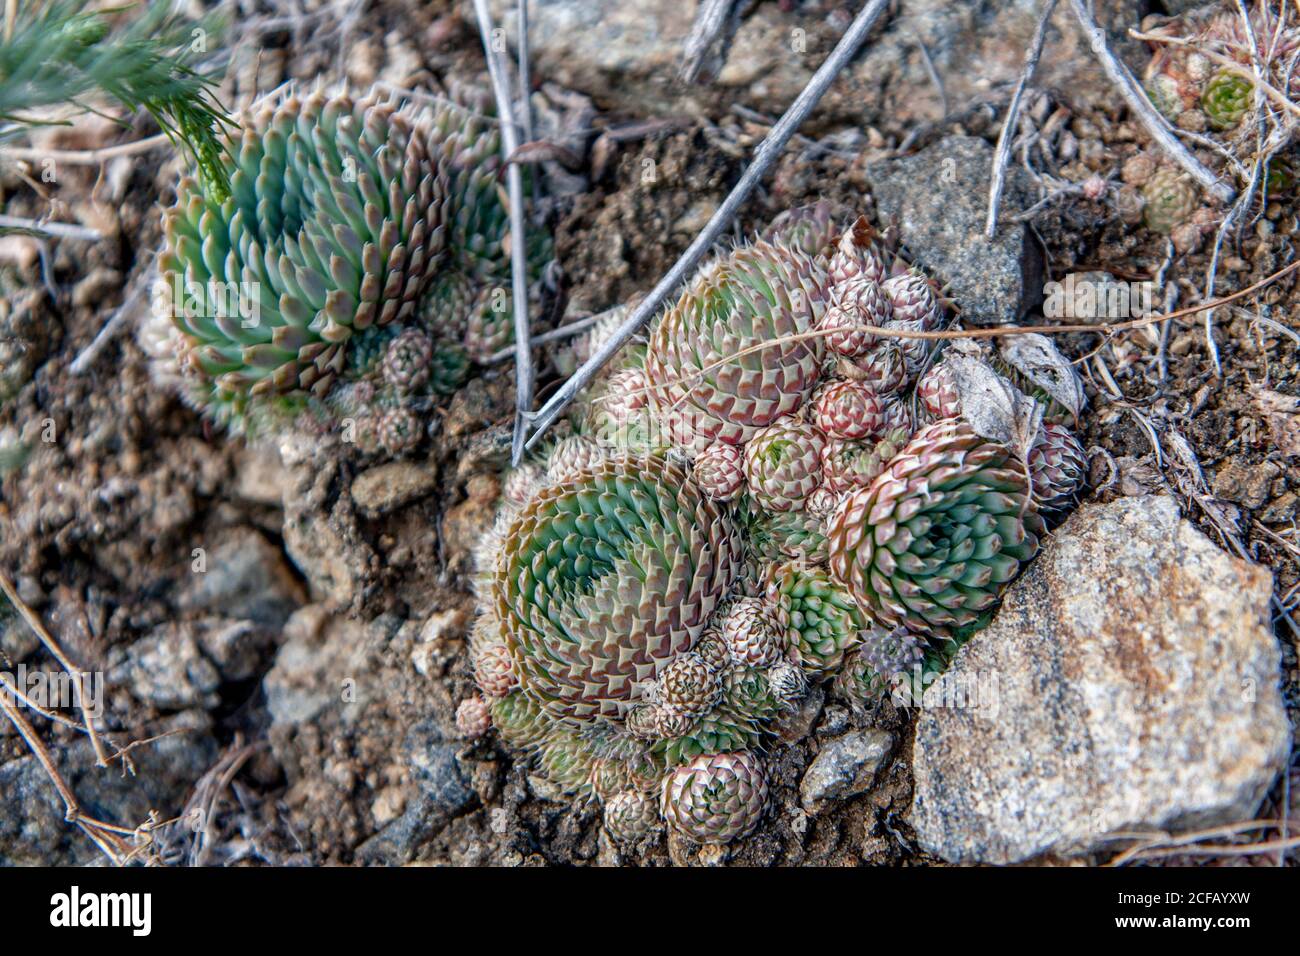 Siberian cactus is a succulent plant growing wild in Siberia on mountain and steppe hills. Stock Photo